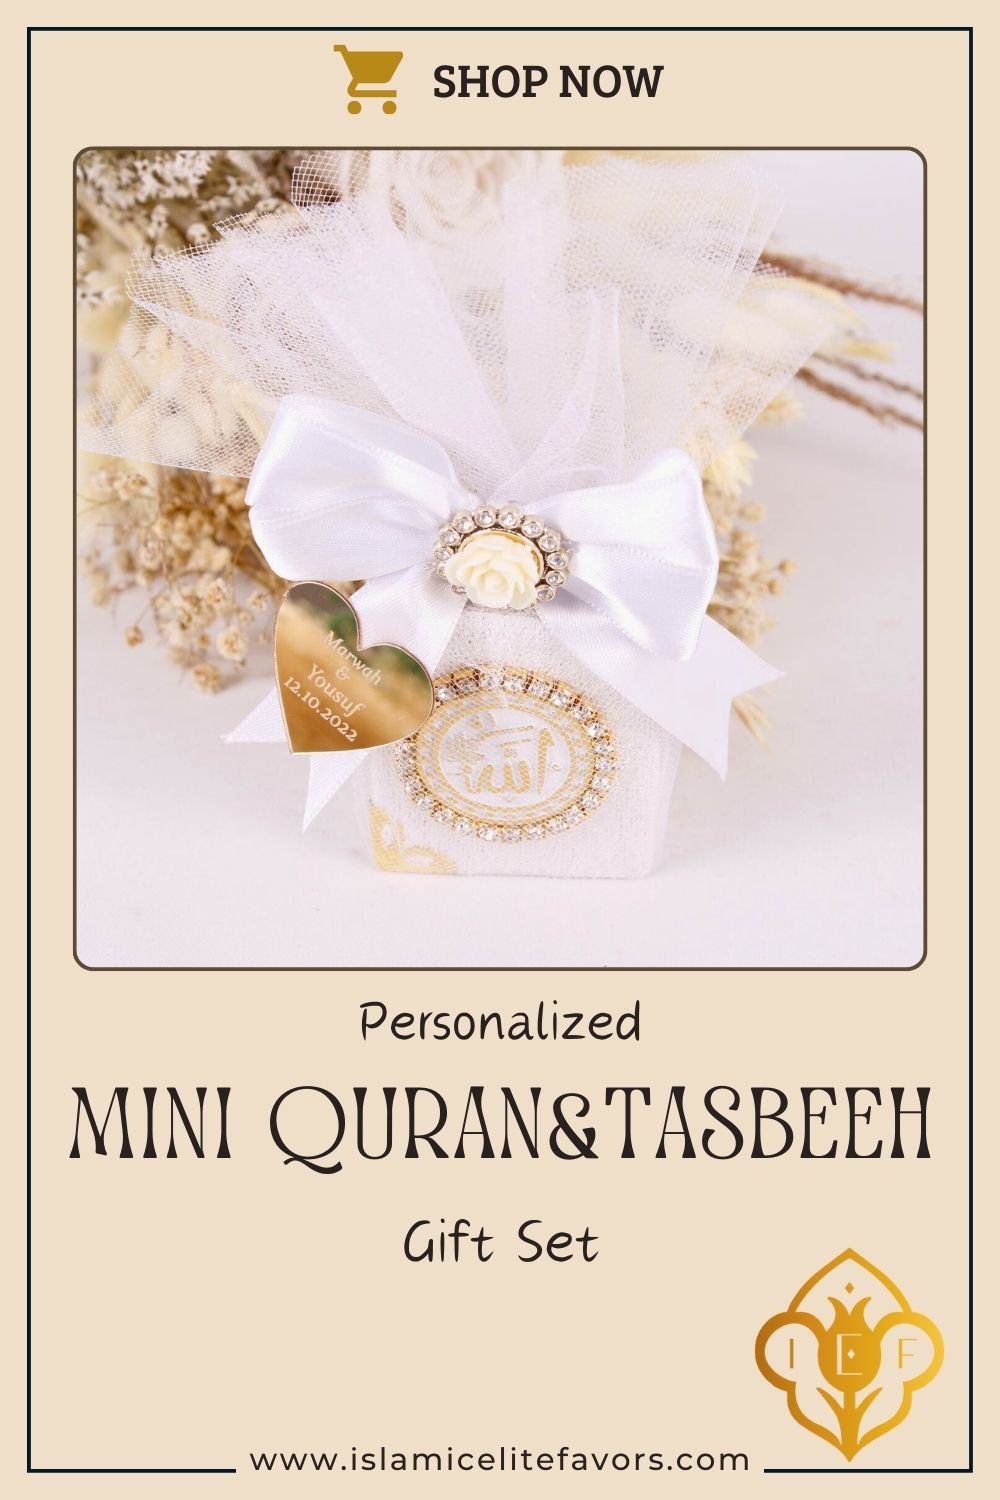 Personalized Velvet Mini Quran Decorated with Rhinestone Wedding Favor - Islamic Elite Favors is a handmade gift shop offering a wide variety of unique and personalized gifts for all occasions. Whether you're looking for the perfect Ramadan, Eid, Hajj, wedding gift or something special for a birthday, baby shower or anniversary, we have something for everyone. High quality, made with love.